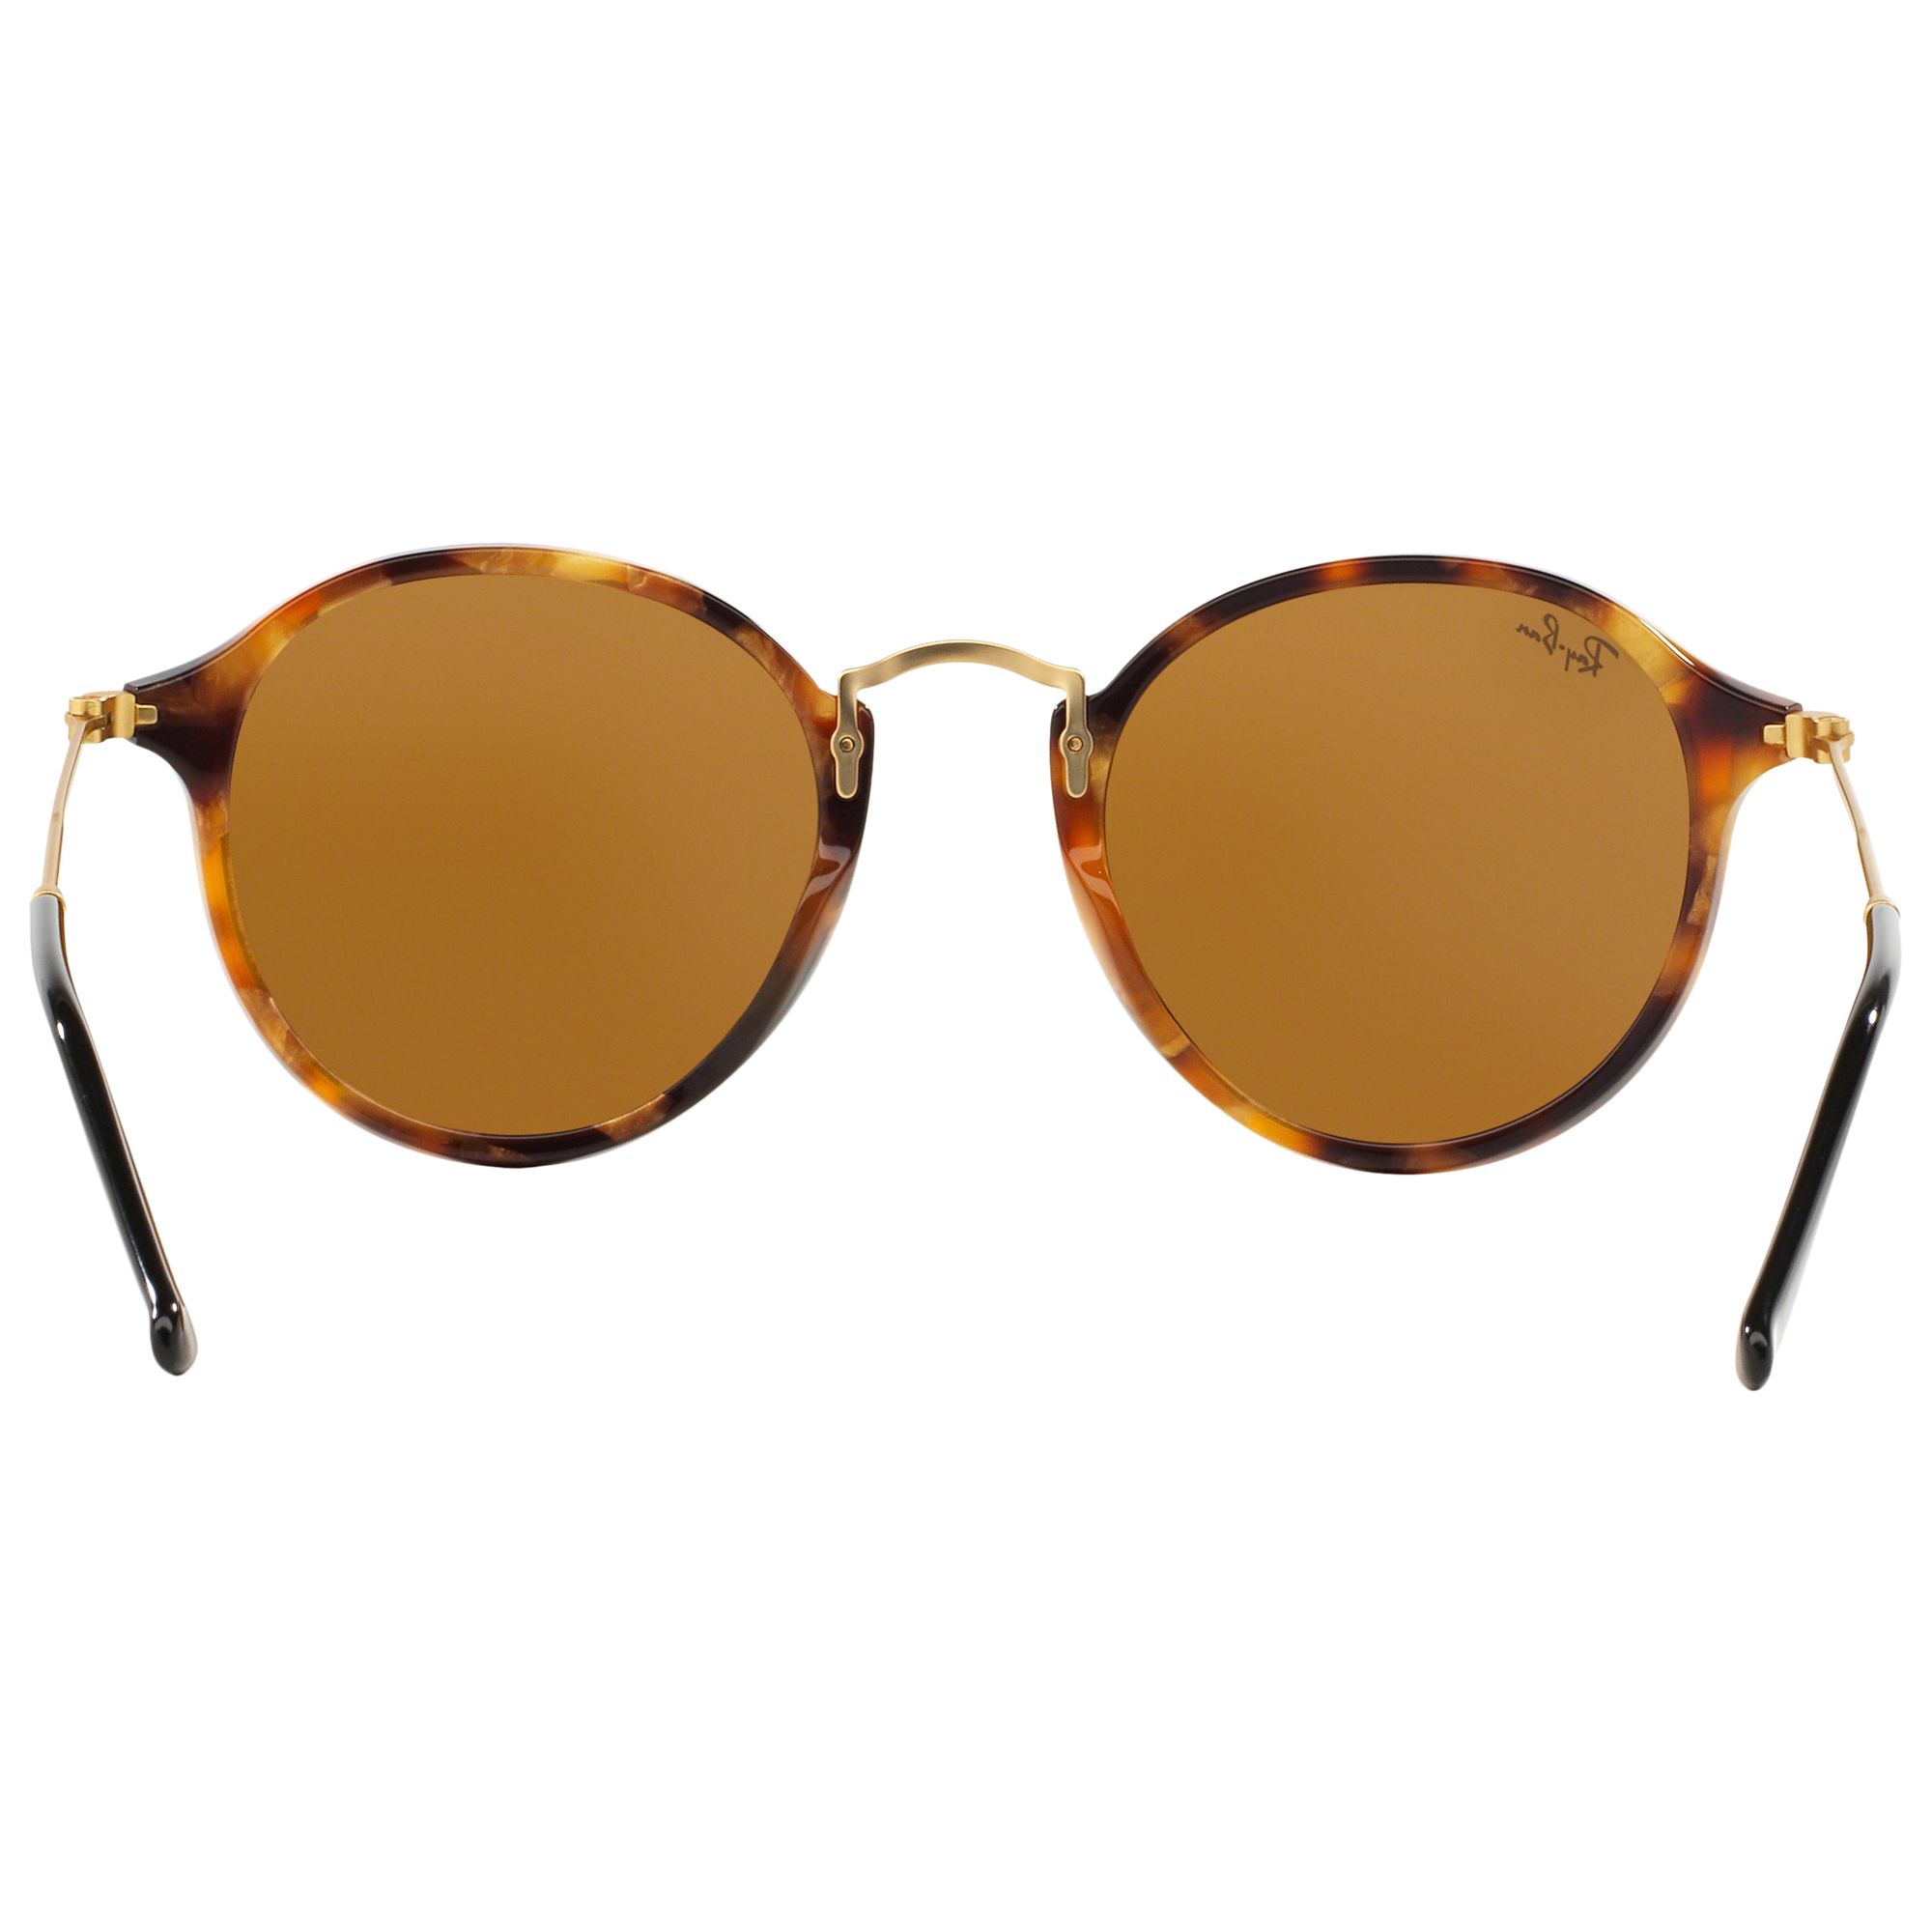 Ray-Ban RB2447 Oval Sunglasses, Tortoise at John Lewis & Partners